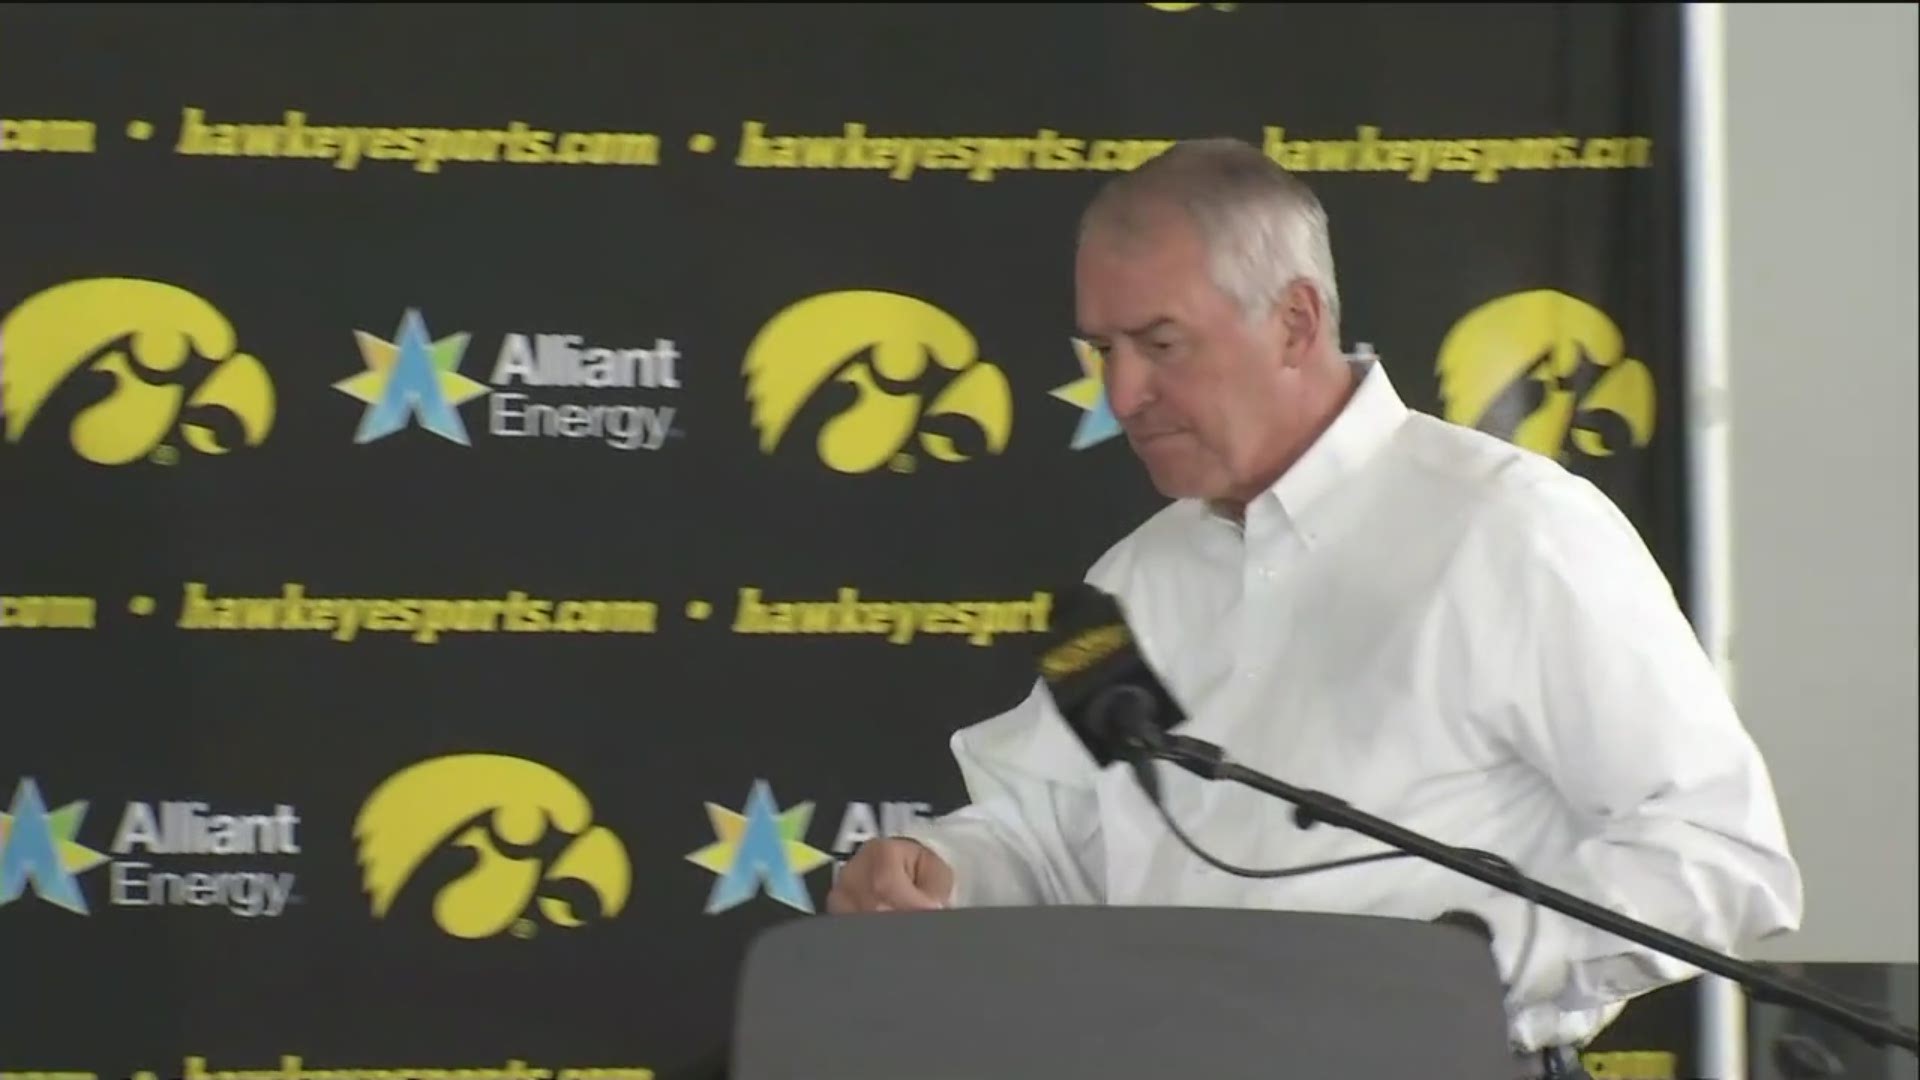 Doyle departs Hawkeye football and will receive $1.1M under a 'separation agreement'